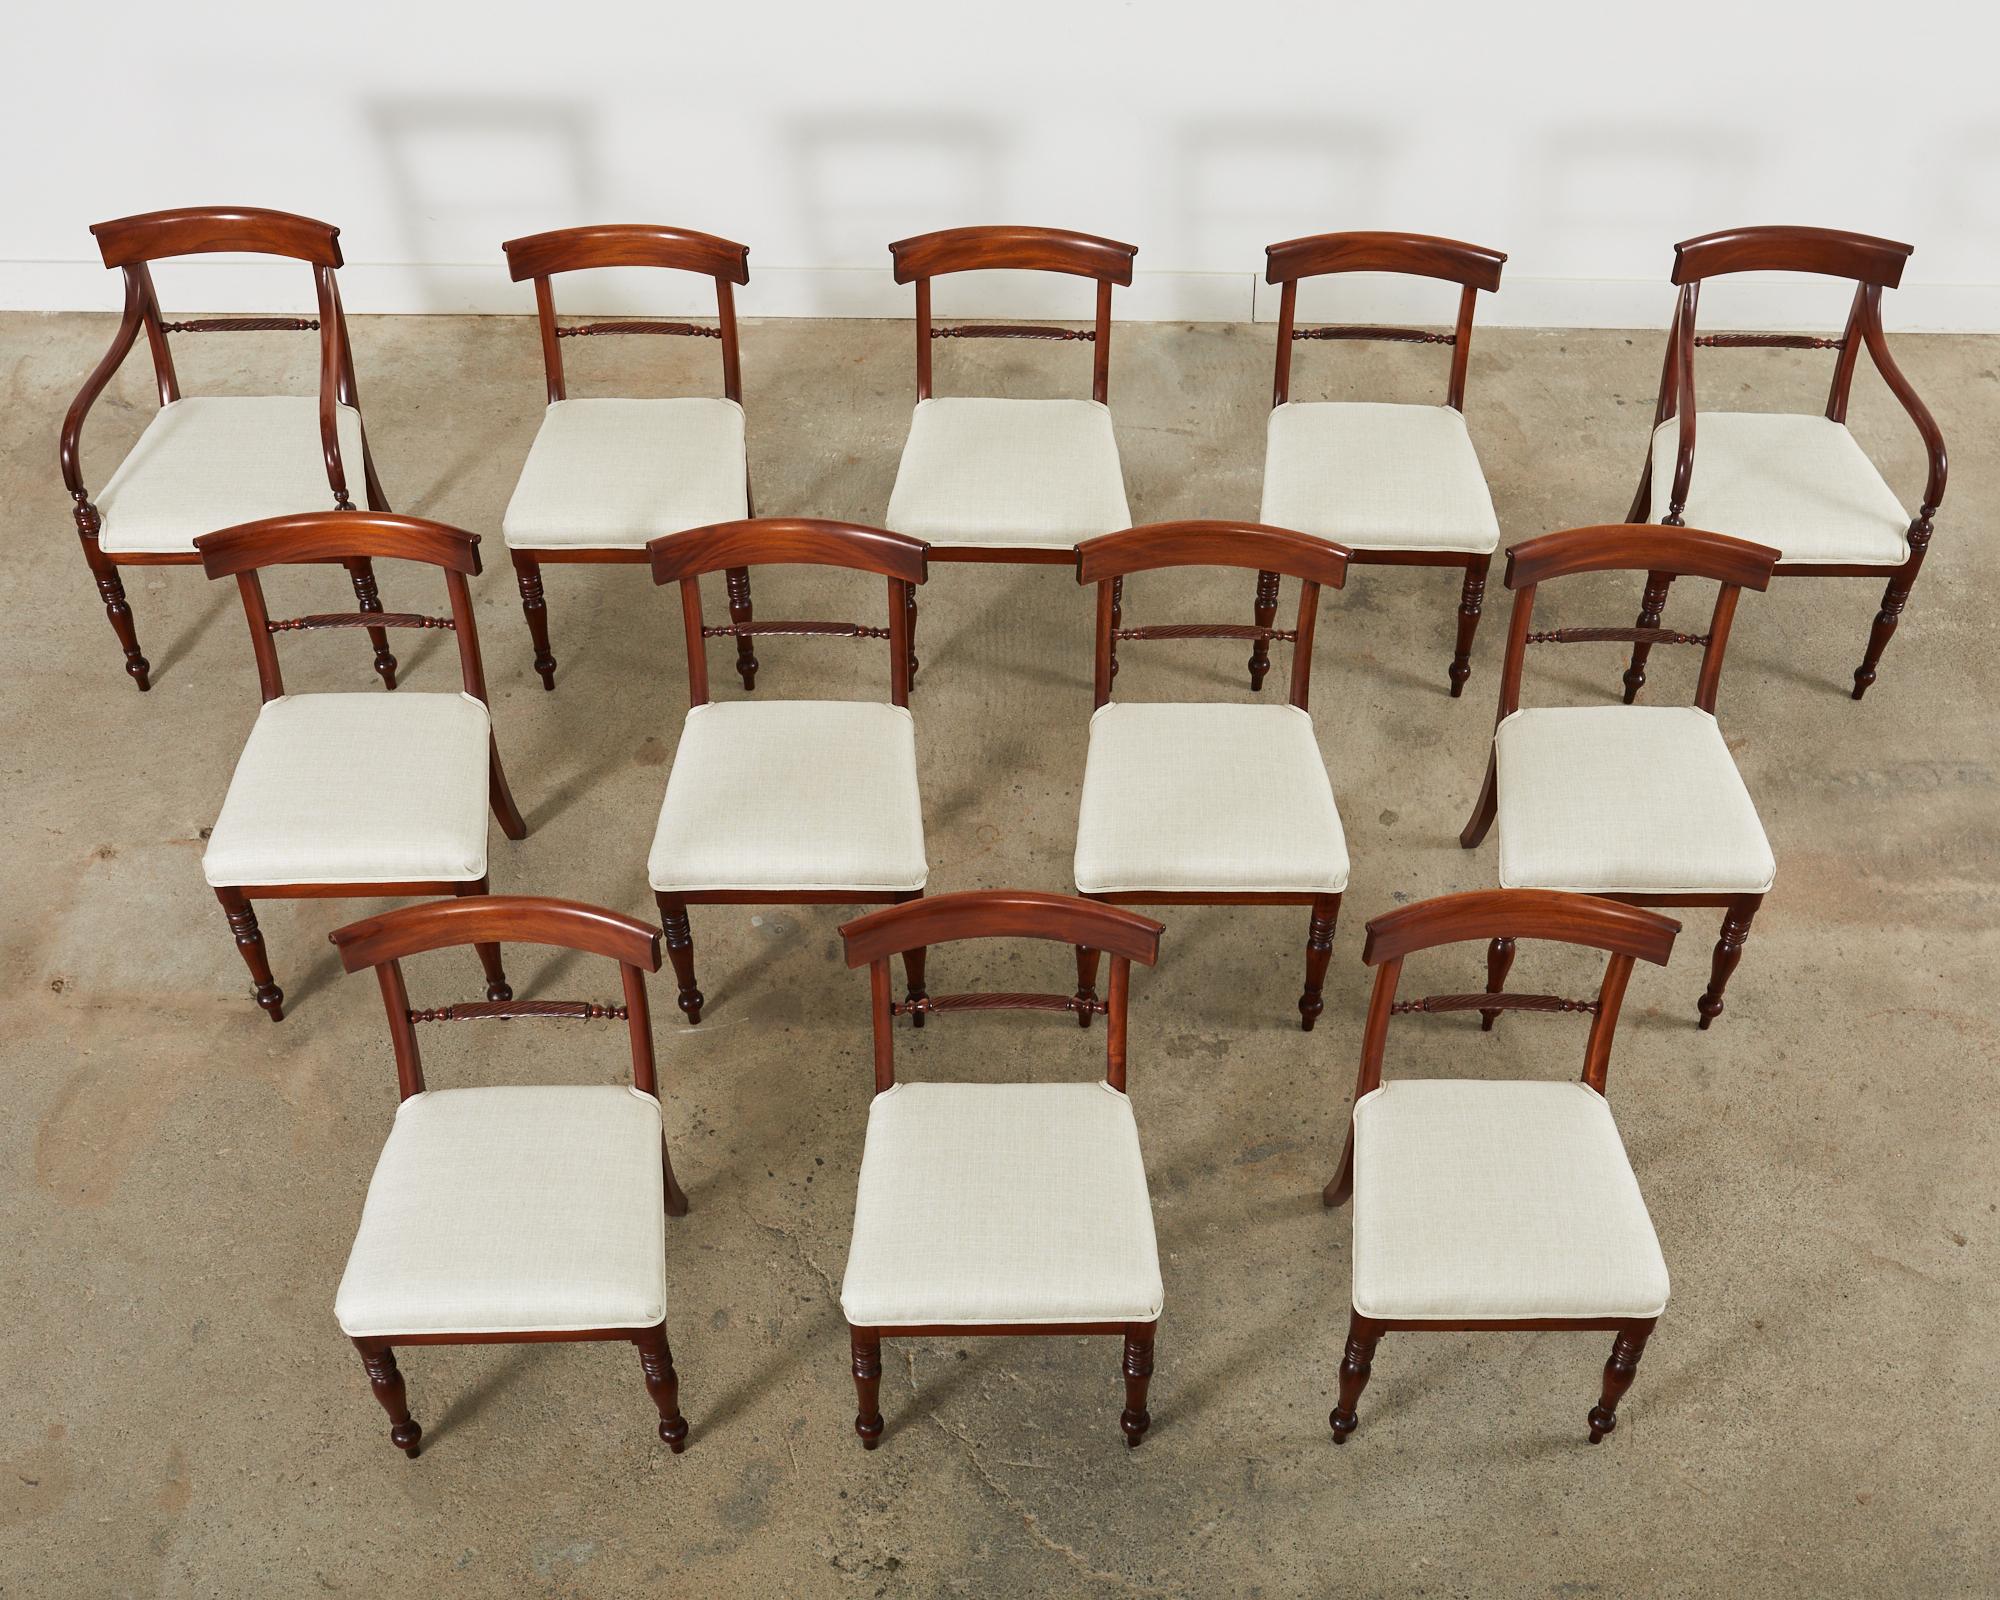 Hand-Crafted Set of Twelve English Regency Style Mahogany Dining Chairs